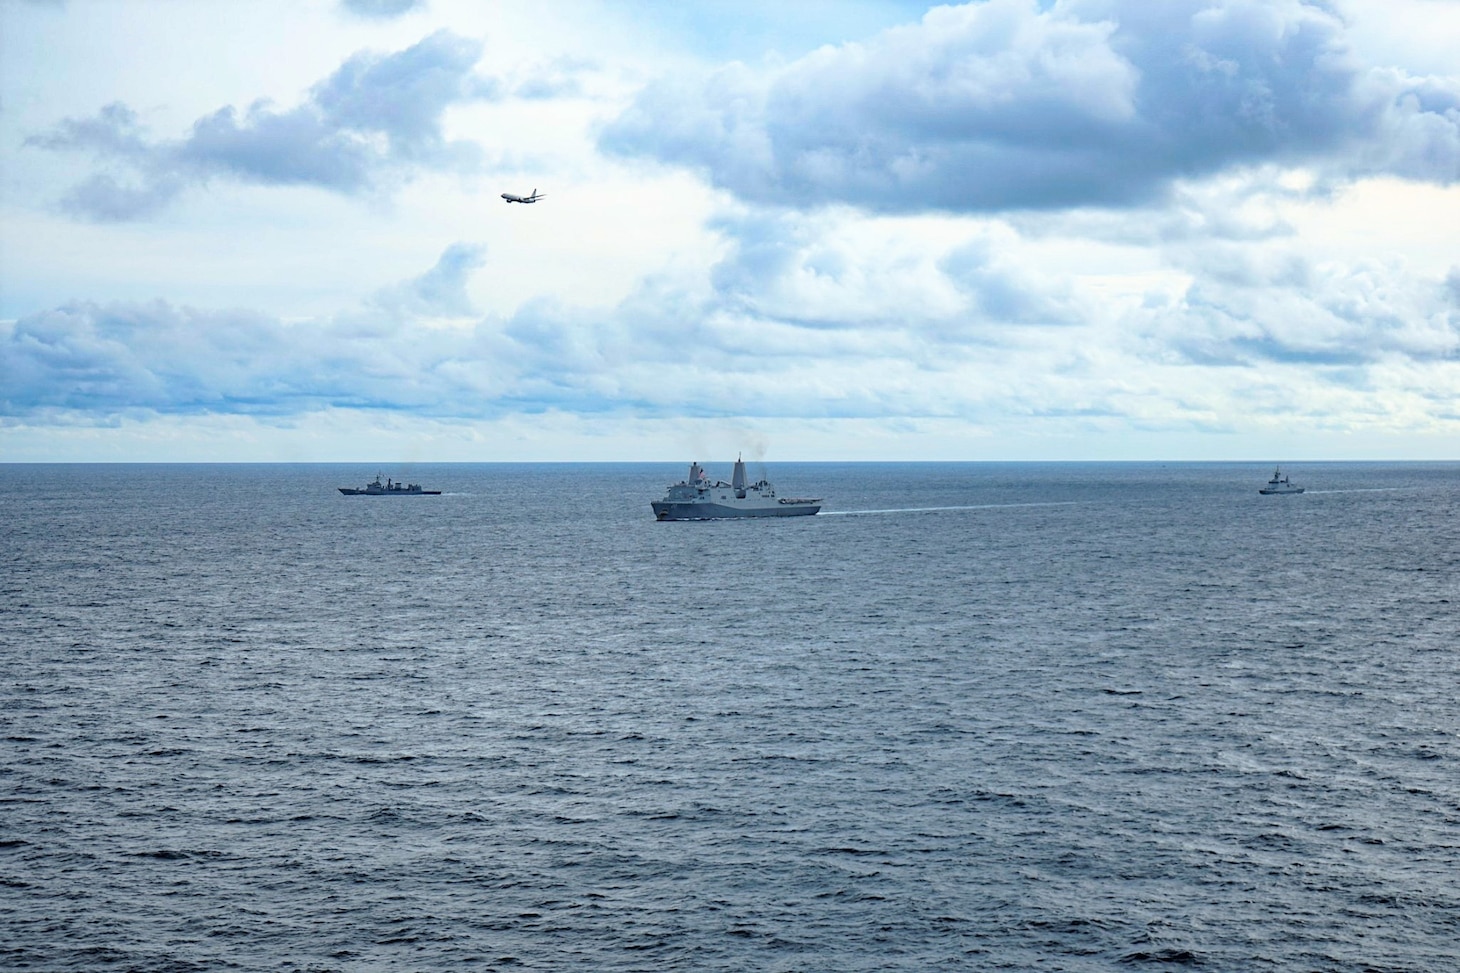 GULF OF THAILAND (Sept. 8, 2021) USS Green Bay (LPD 20) sails in company with Royal Navy Thai frigates as a U.S Navy P-8 from Commander, Task Force 72 flies overhead during Cooperation Afloat Readiness and Training (CARAT) exercise. In its 27th year, the CARAT series is comprised of multinational exercises designed to enhance U.S. and partner navies' abilities to operate together in response to traditional and non-traditional maritime security challenges in the Indo-Pacific region. (Courtesy photo by Royal Thai Navy)